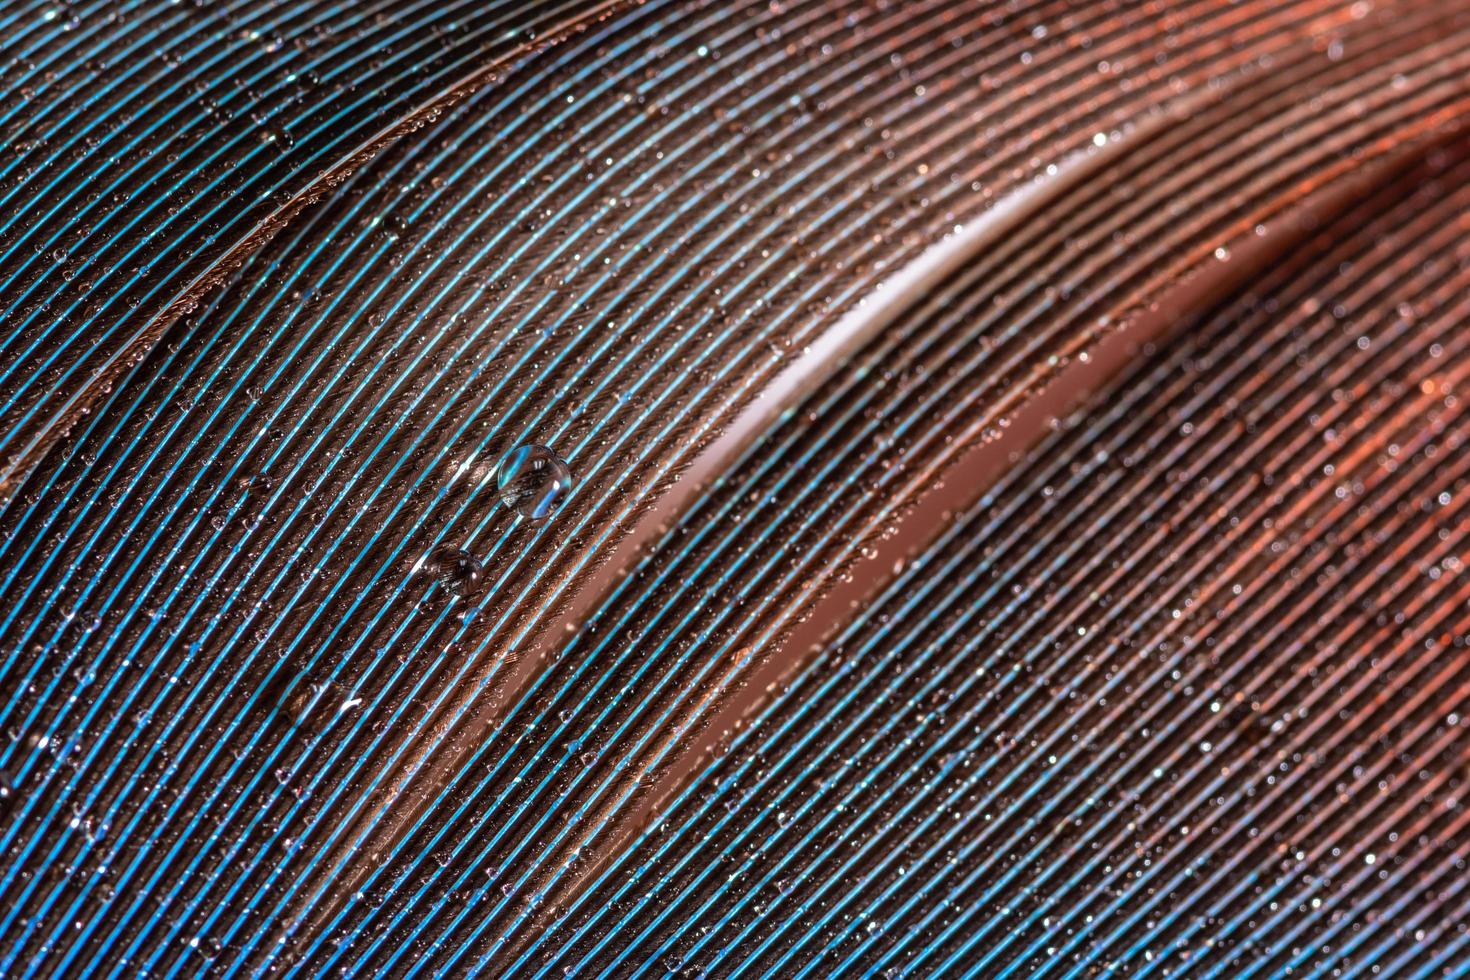 Drops of water on a feather photo